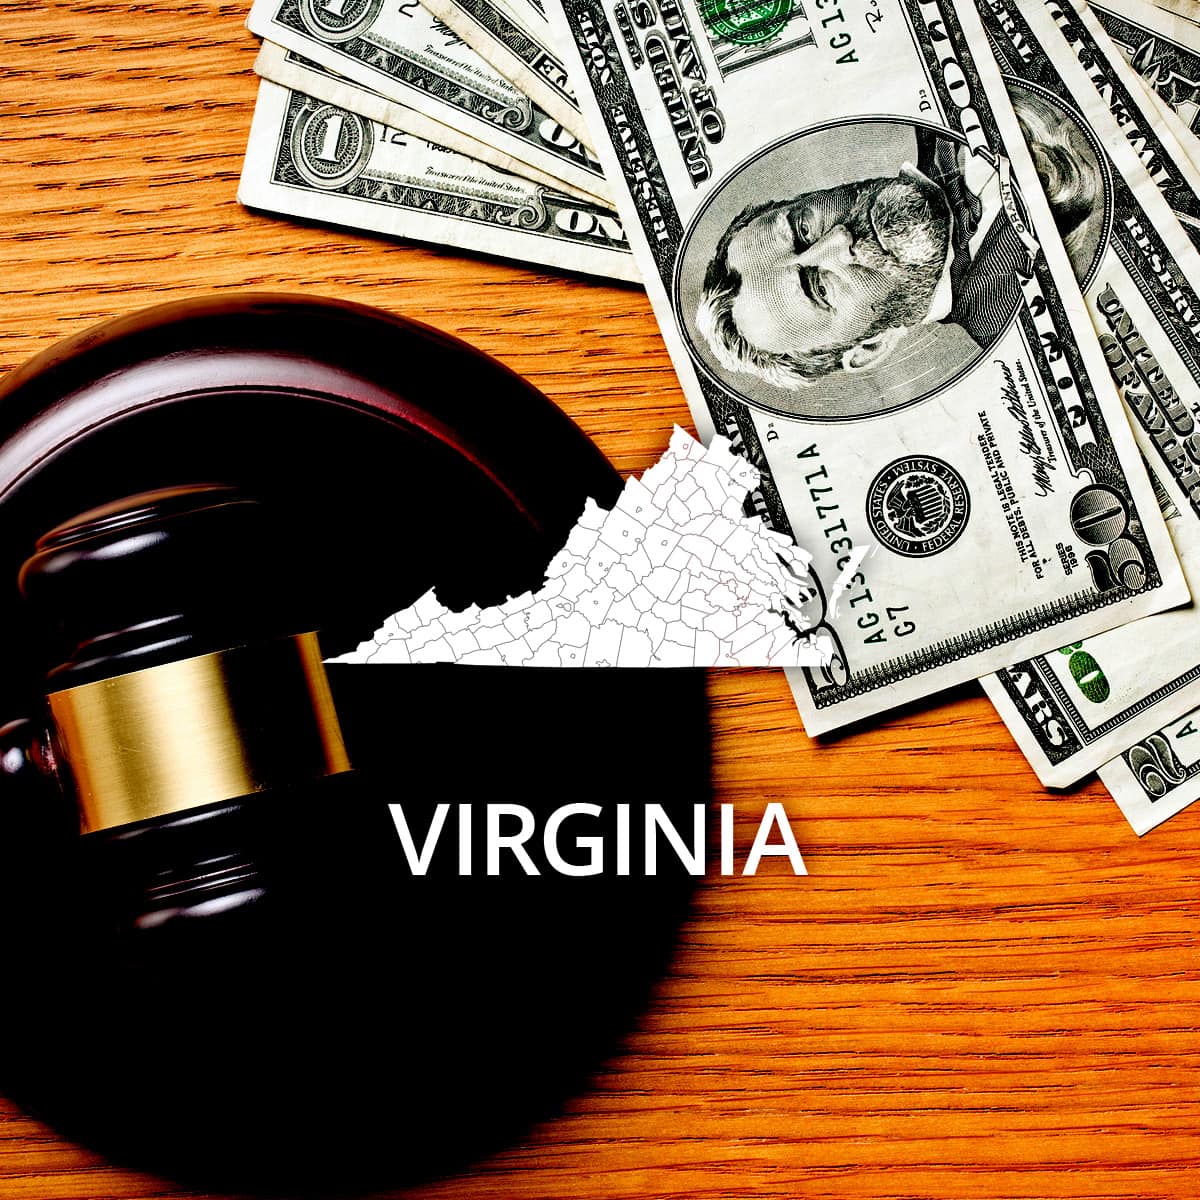 How to File Bankruptcy in Virginia